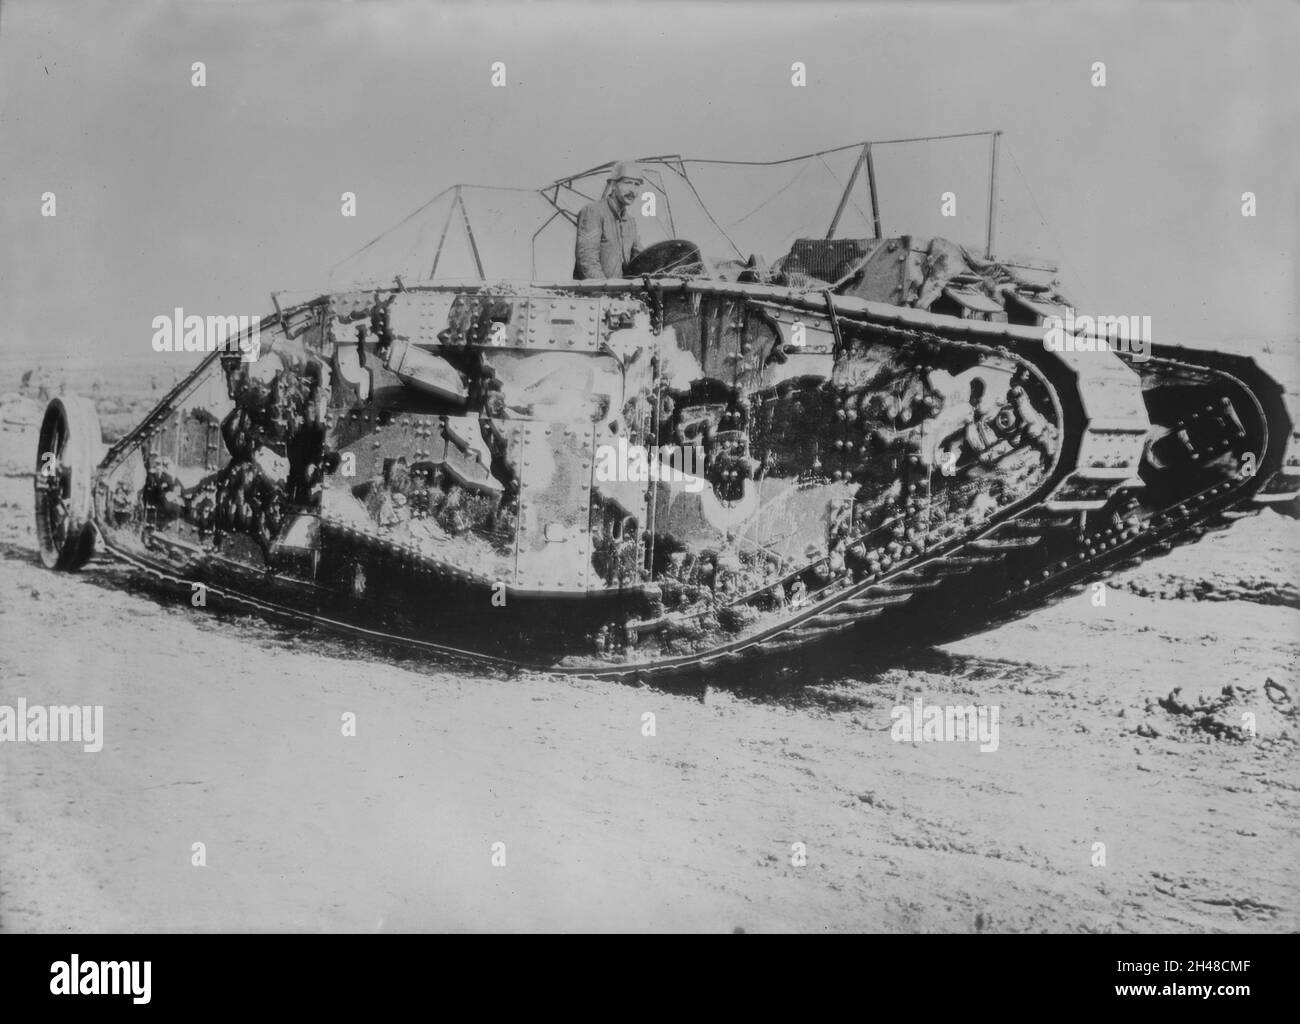 A vintage photo dated September 15th 1916 of a British Mark 1 female tank during The Battle of Flers-Courcelette on the Western front in the Somme France.  This was where British forces first used tanks.  The Mark 1 female tank was armed with four Vickers and one Hotchkiss machine-gun Stock Photo